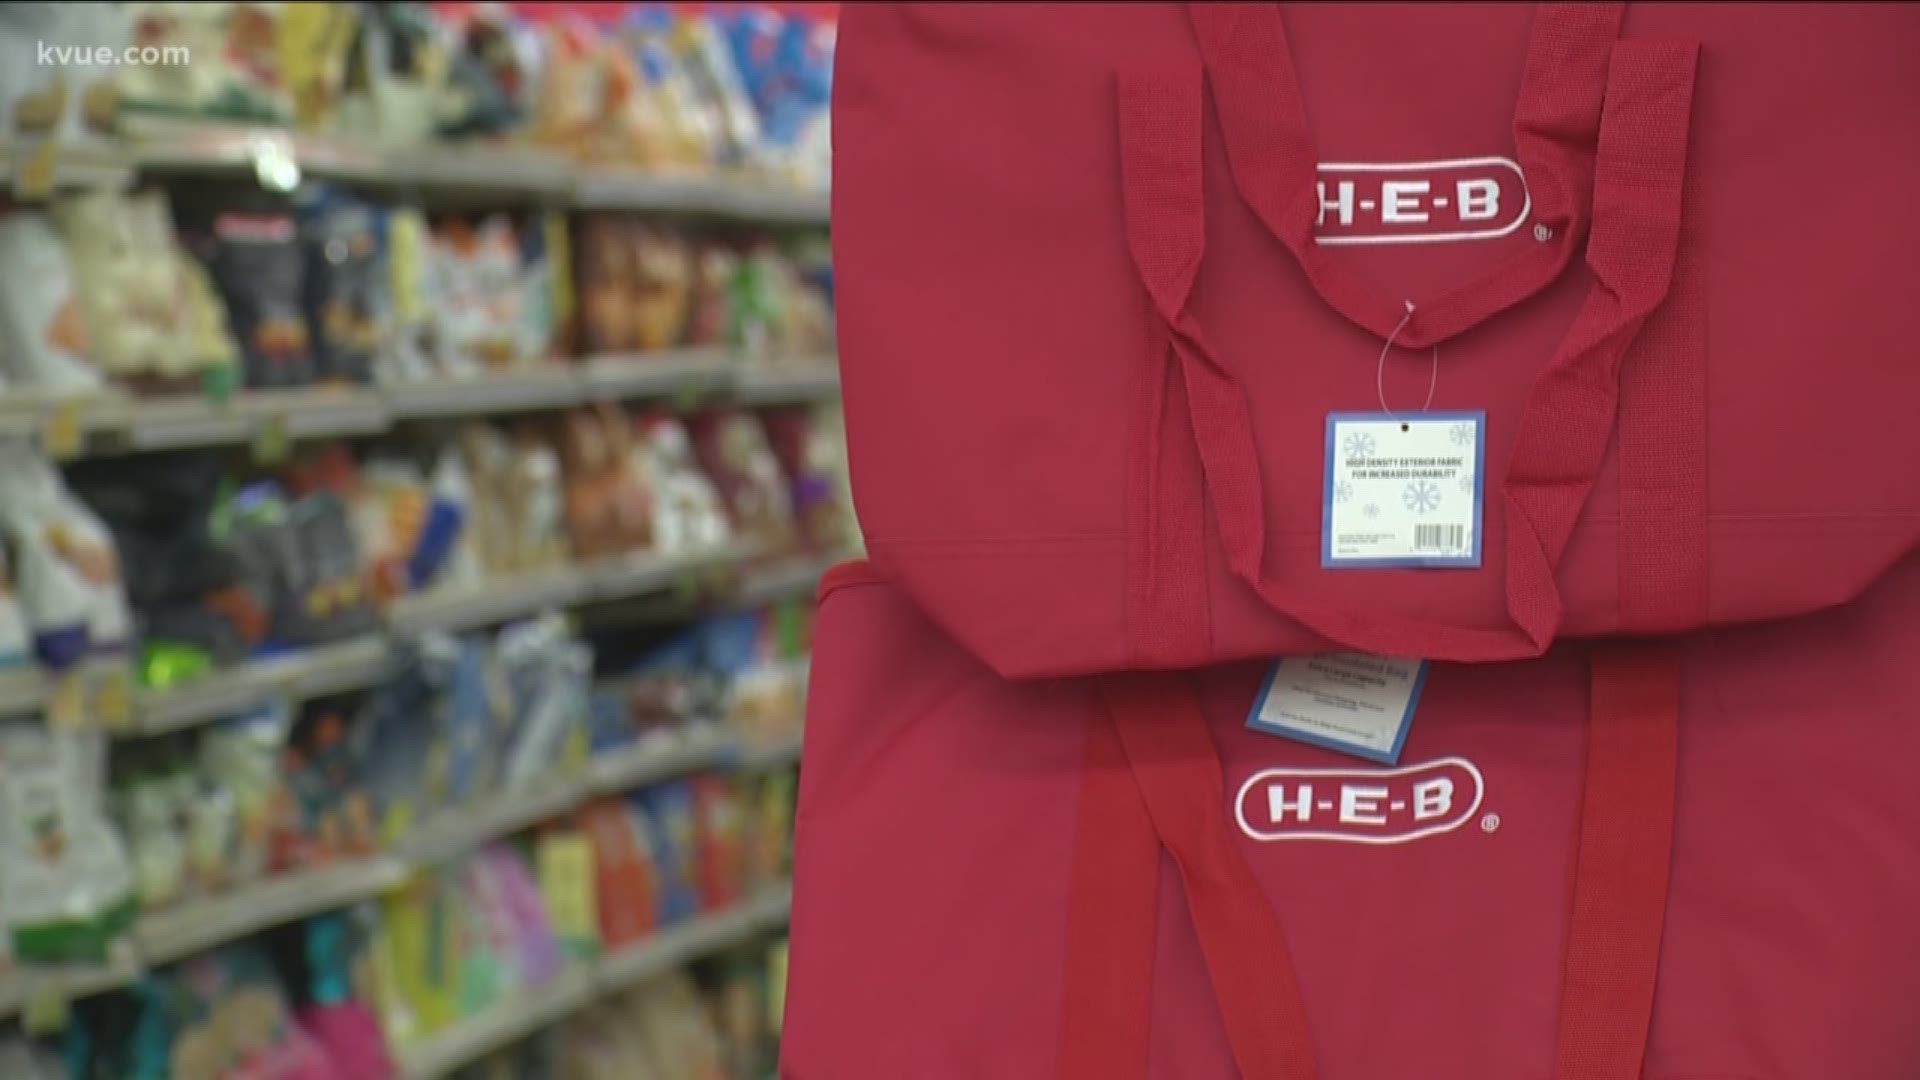 H-E-B tied with Trader Joe's and Wegmans for high customer satisfaction, according to the American Consumer Index Retail and Consumer Shipping Report.